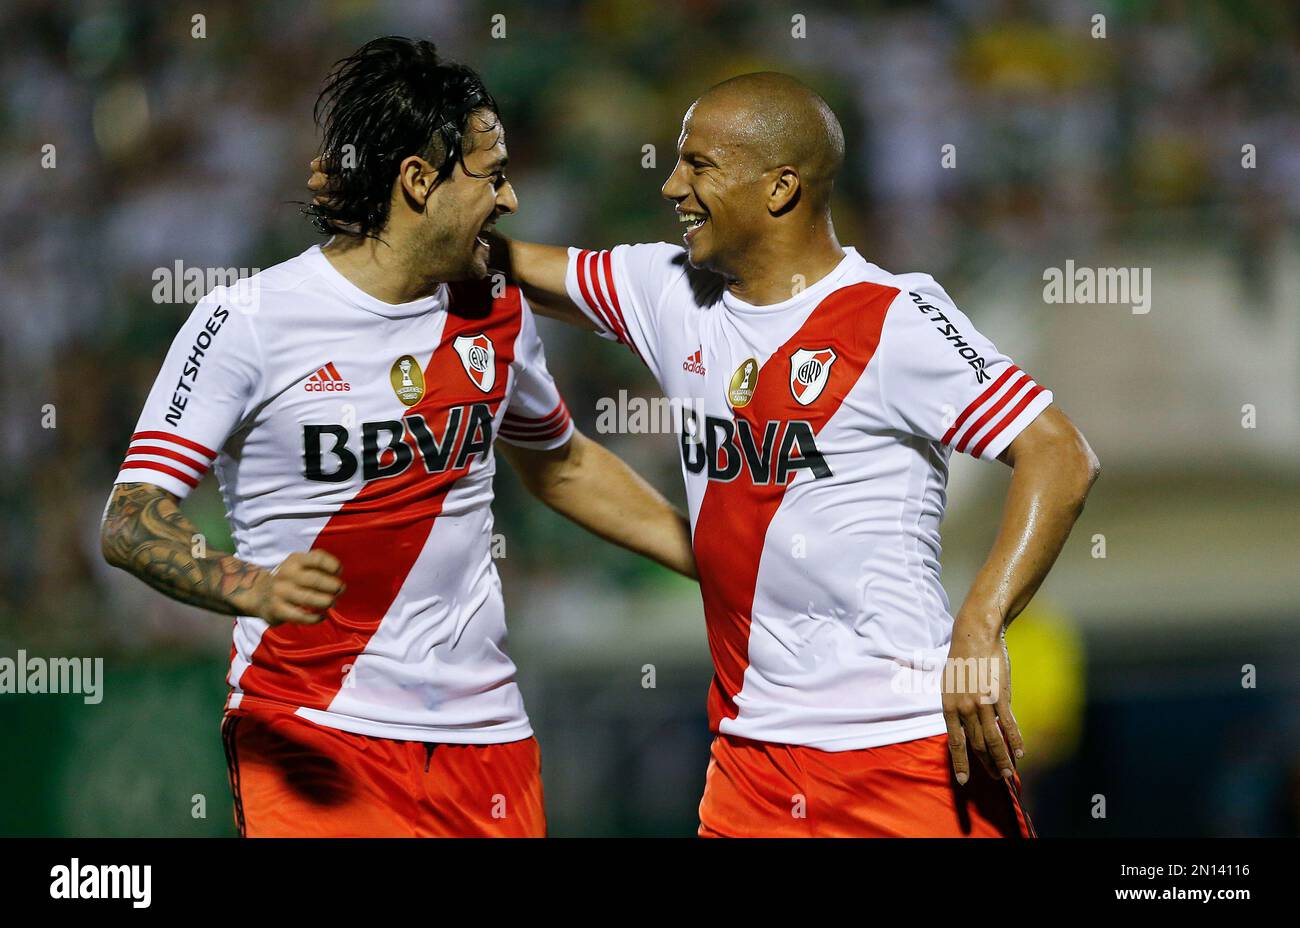 Carlos Andres Sanchez of Argentina's River Plate, right, celebrates with  teammate Leonardo Pisculichi after scoring against Brazil's Chapecoense  during a Copa Sudamericana soccer match in Chapeco, Brazil, Wednesday, Oct.  28, 2015. (AP